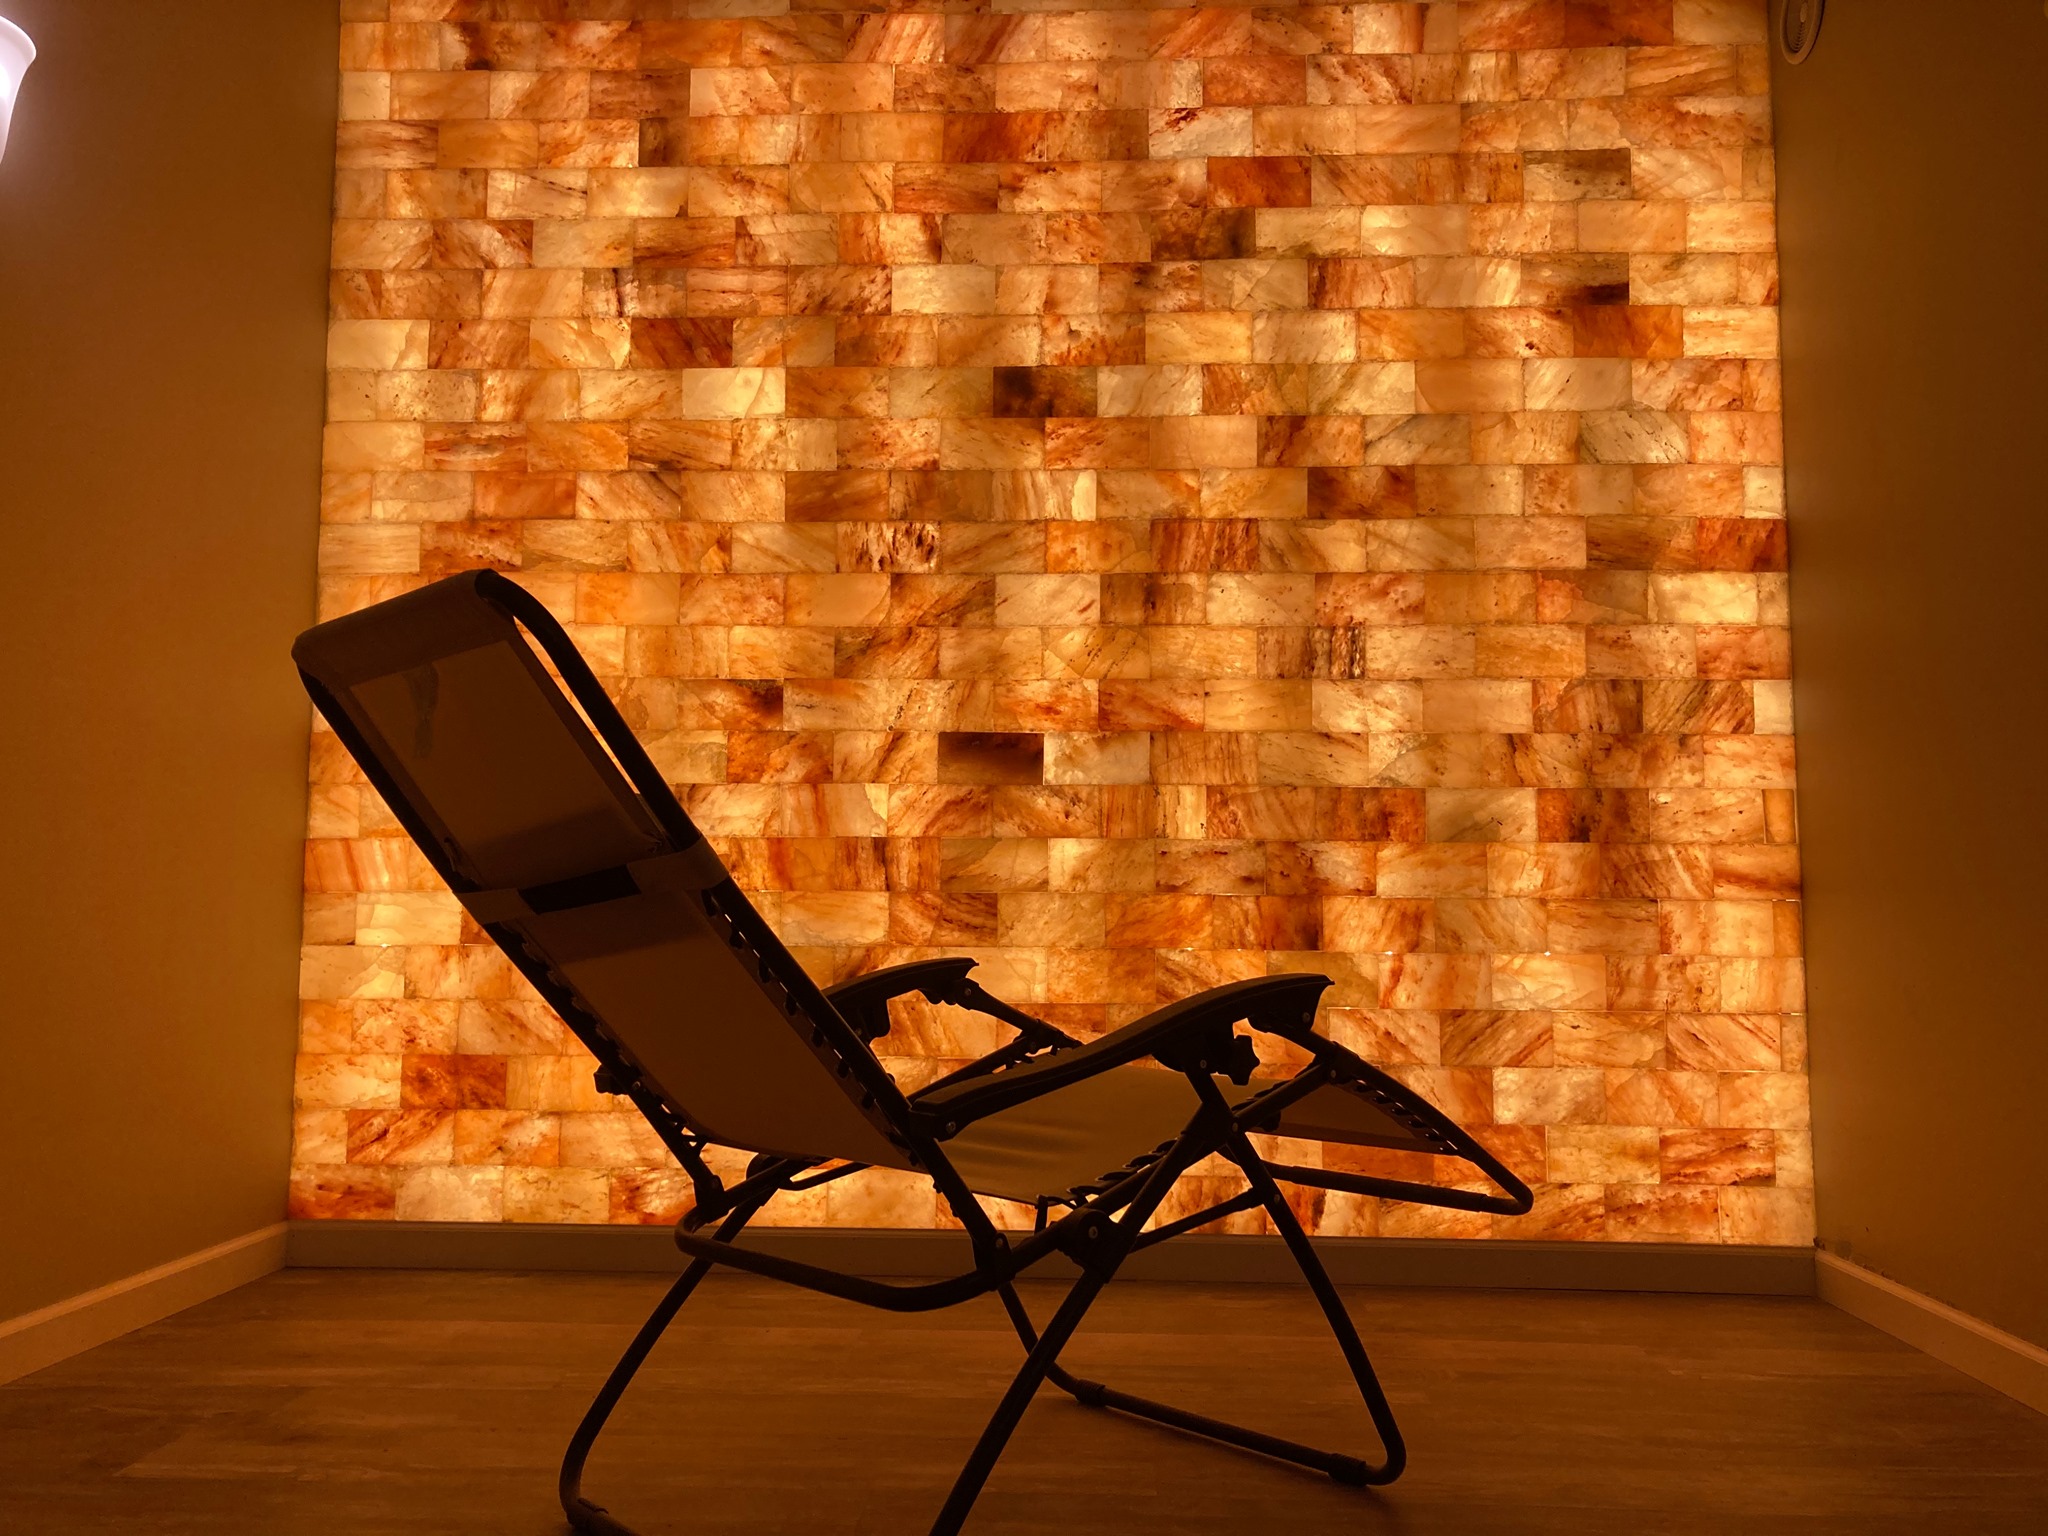 A Reclining Chair Facing A Led Backlit Salt Panel Wall At Restoring Eden - Gilsum, New Hampshire.